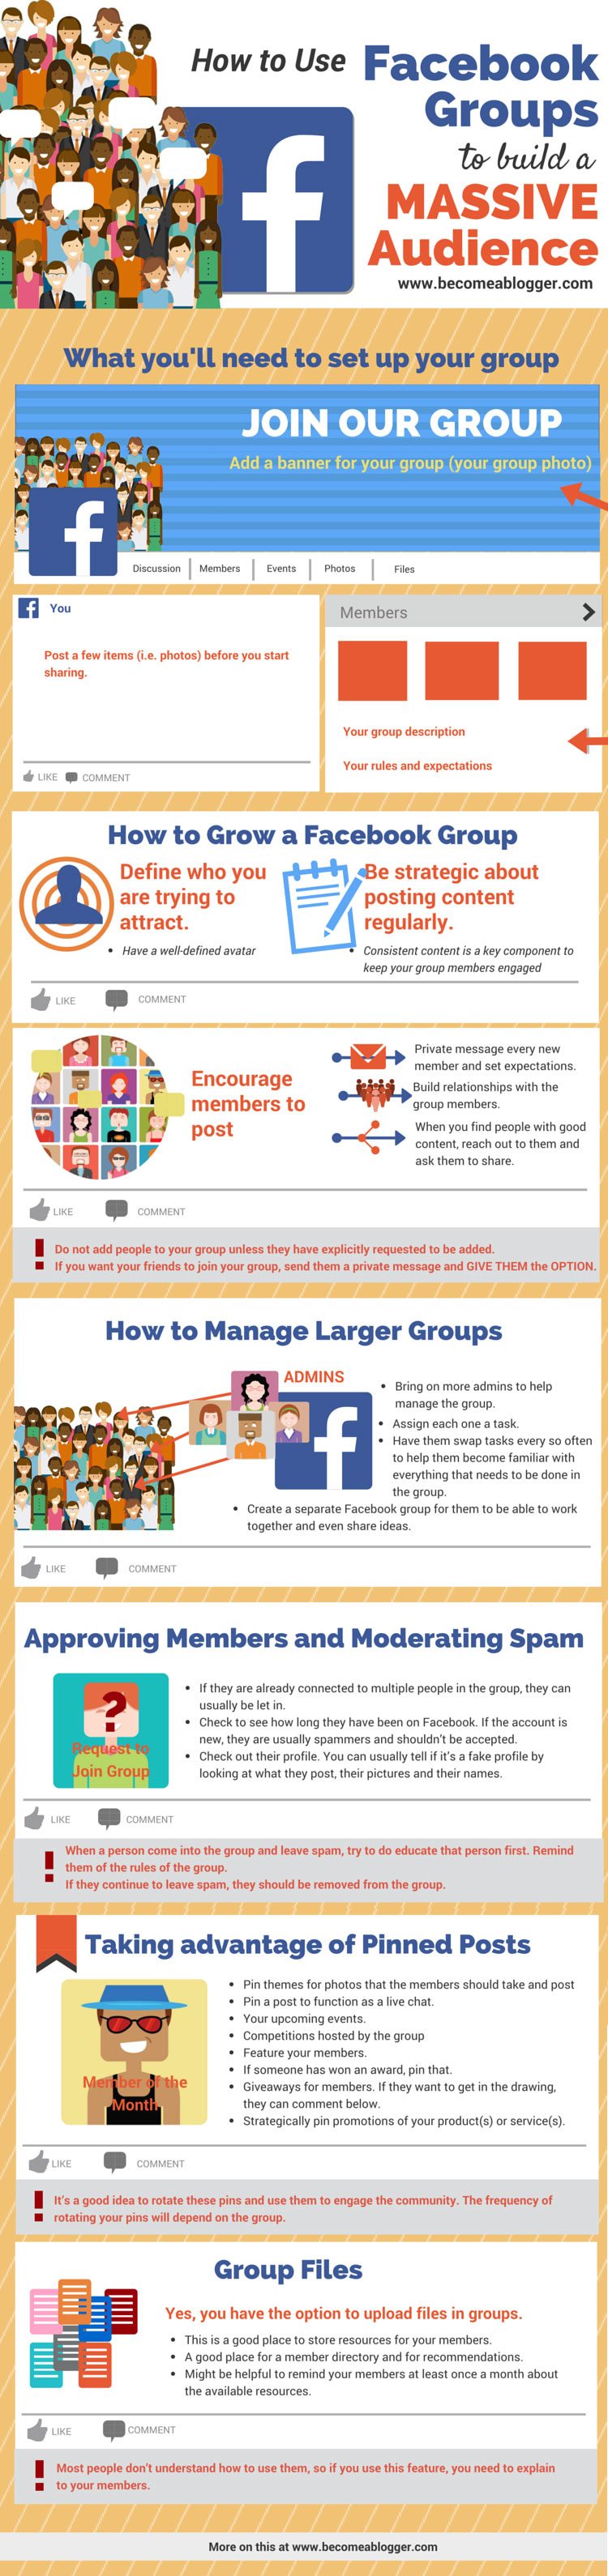 How to Use Facebook Groups to Build a Massive Audience